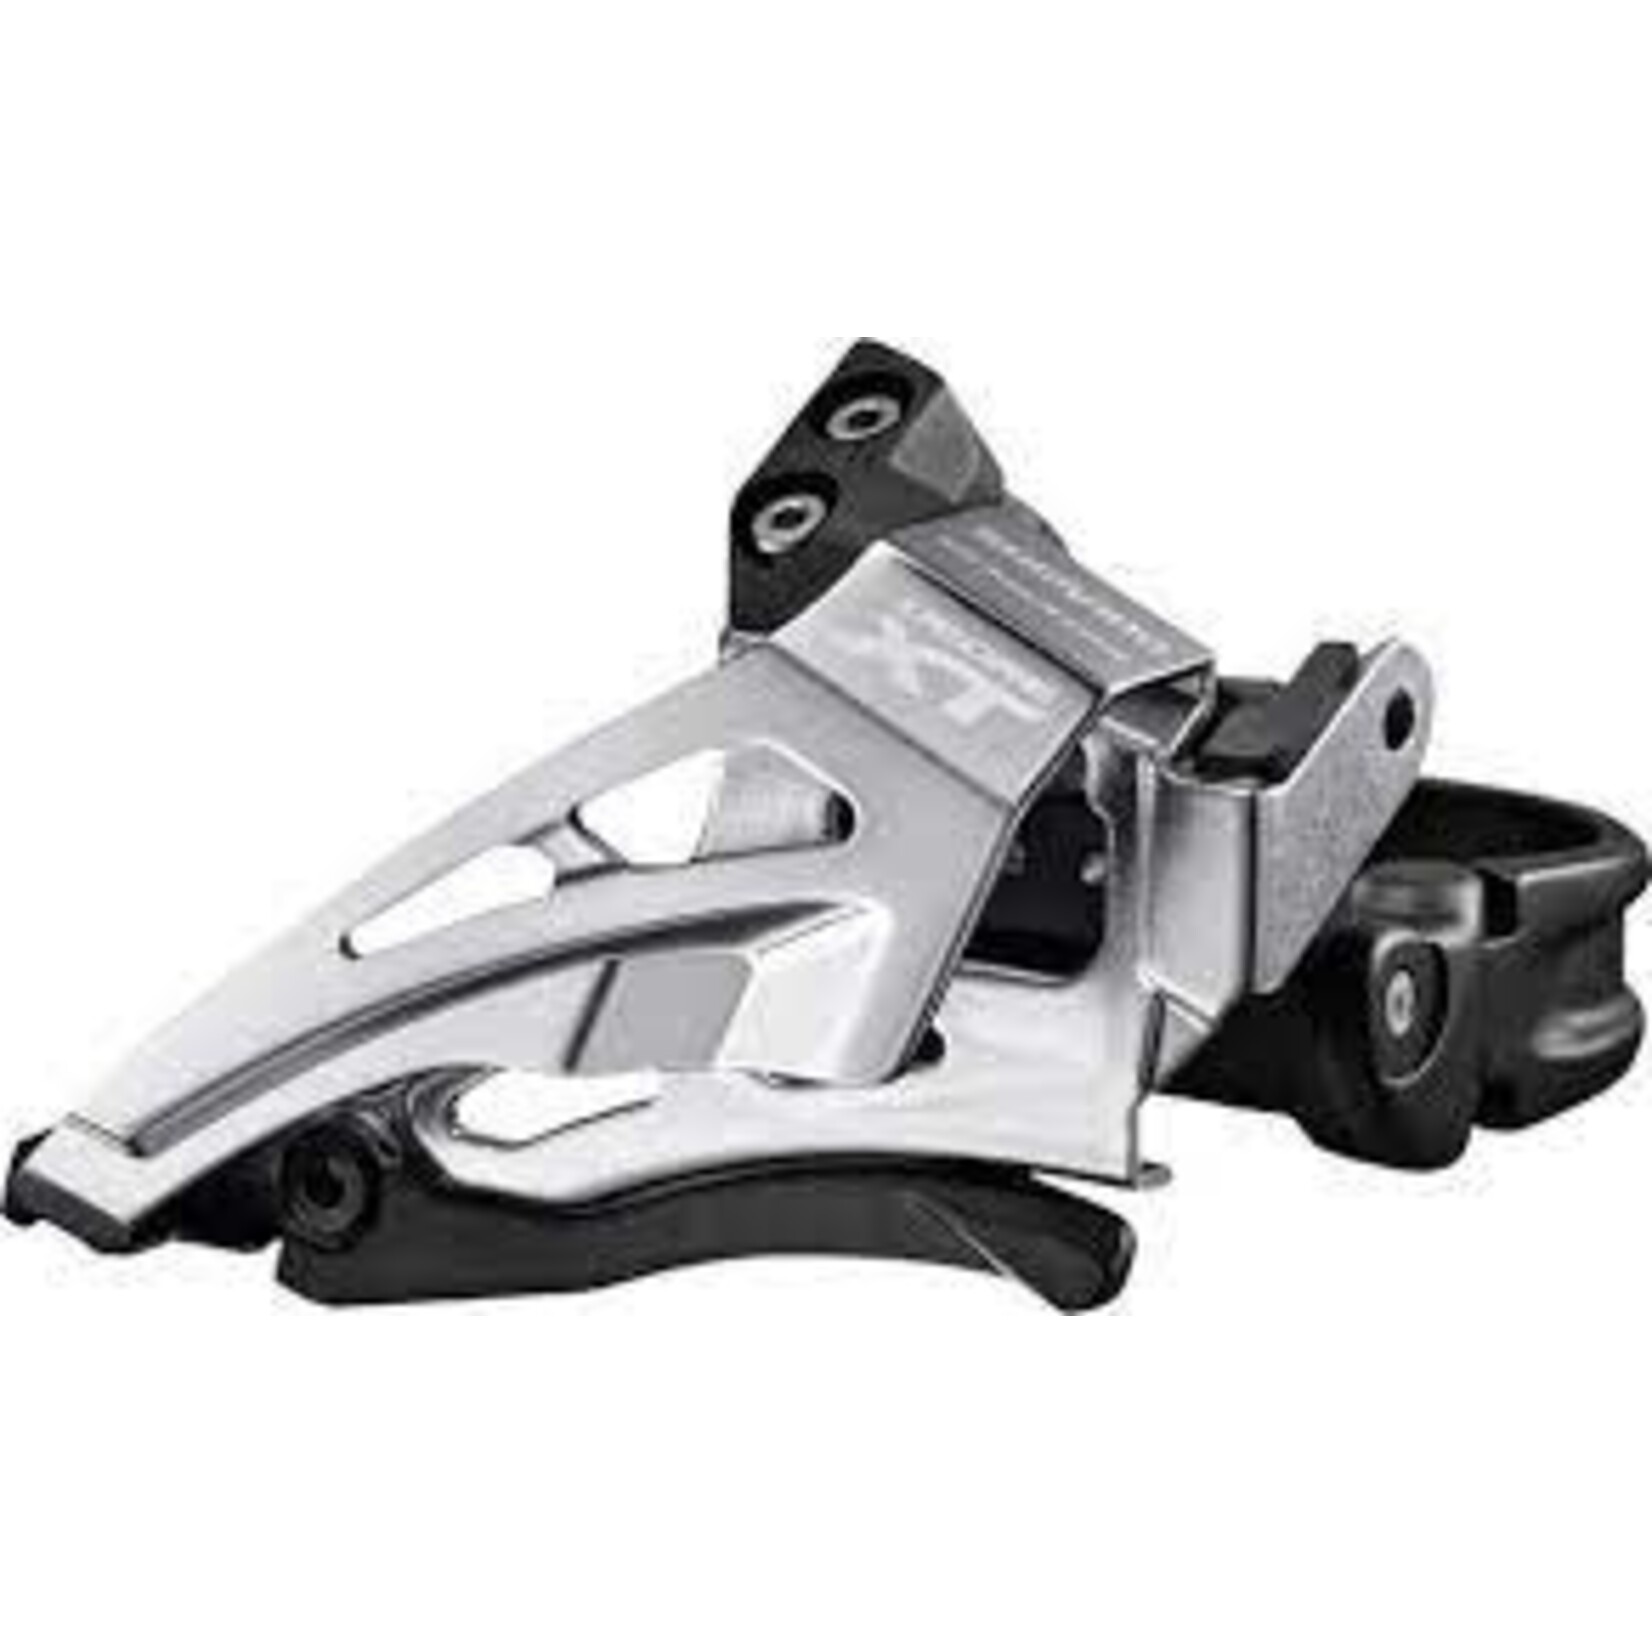 Shimano FRONT DERAILLEUR, FD-M8025-H, 2X11,HIGH,DOWN-SWING,TOP-PULL